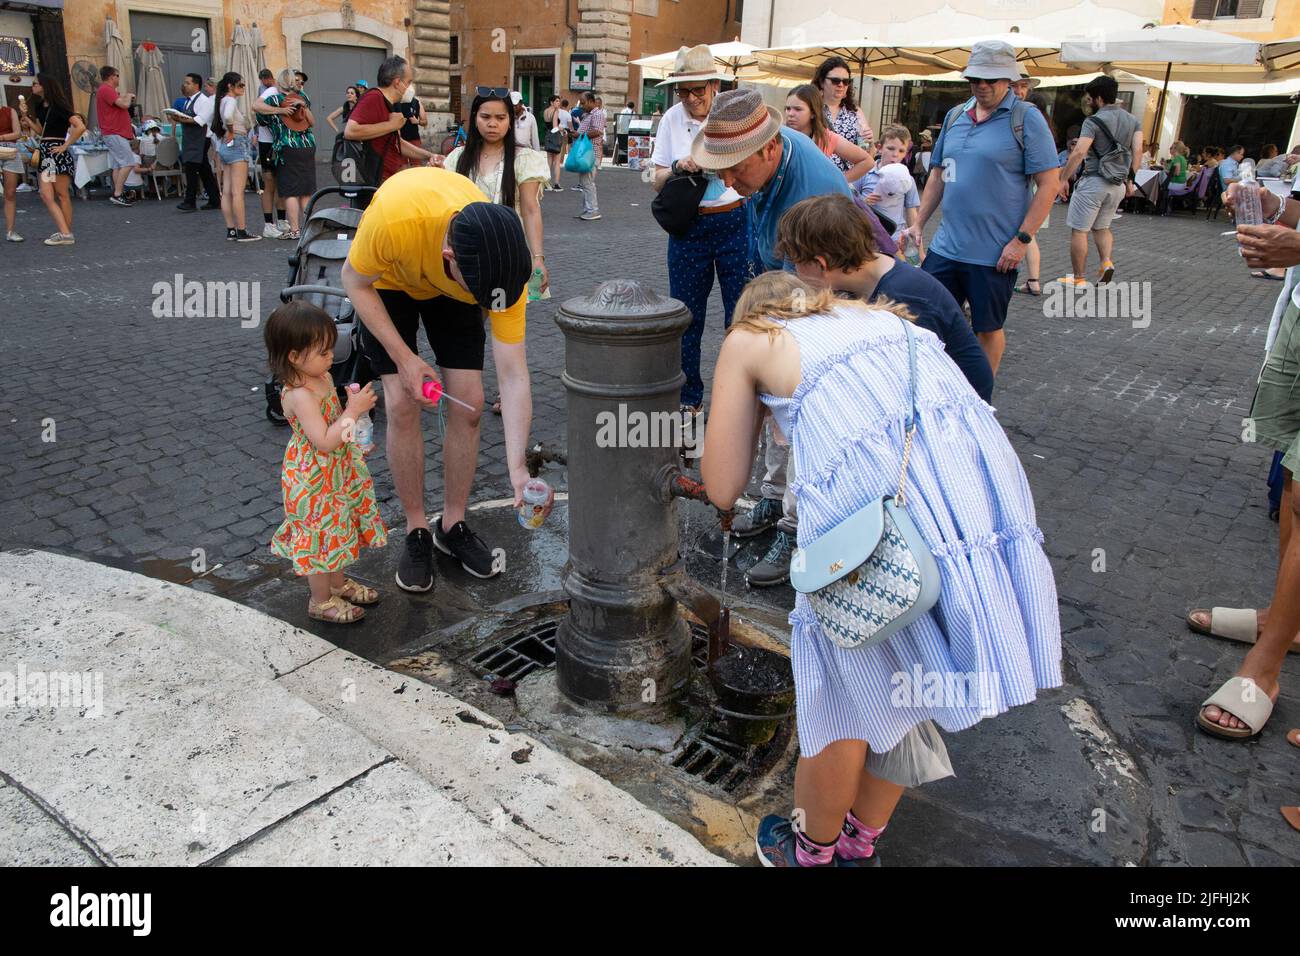 Rome, Italy, July 3th, 2022: People taking water from a street dispenser in the square in fron of the roman Parthenon, as extreme heat of 37-39° C affceted the city Credit: Christian Creixell/Alamy Live News Stock Photo